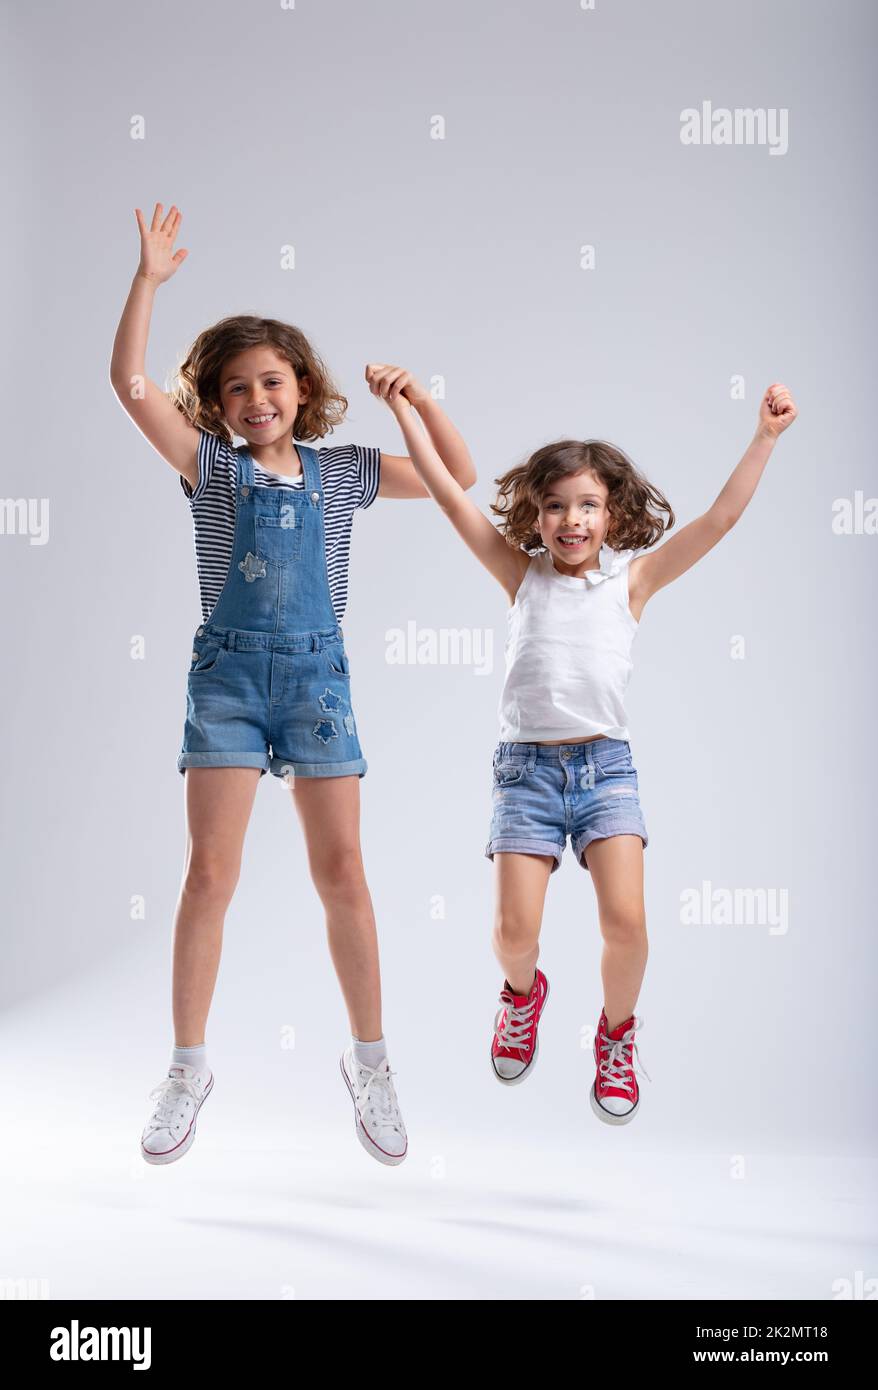 Two vivacious lively little girls jumping together Stock Photo